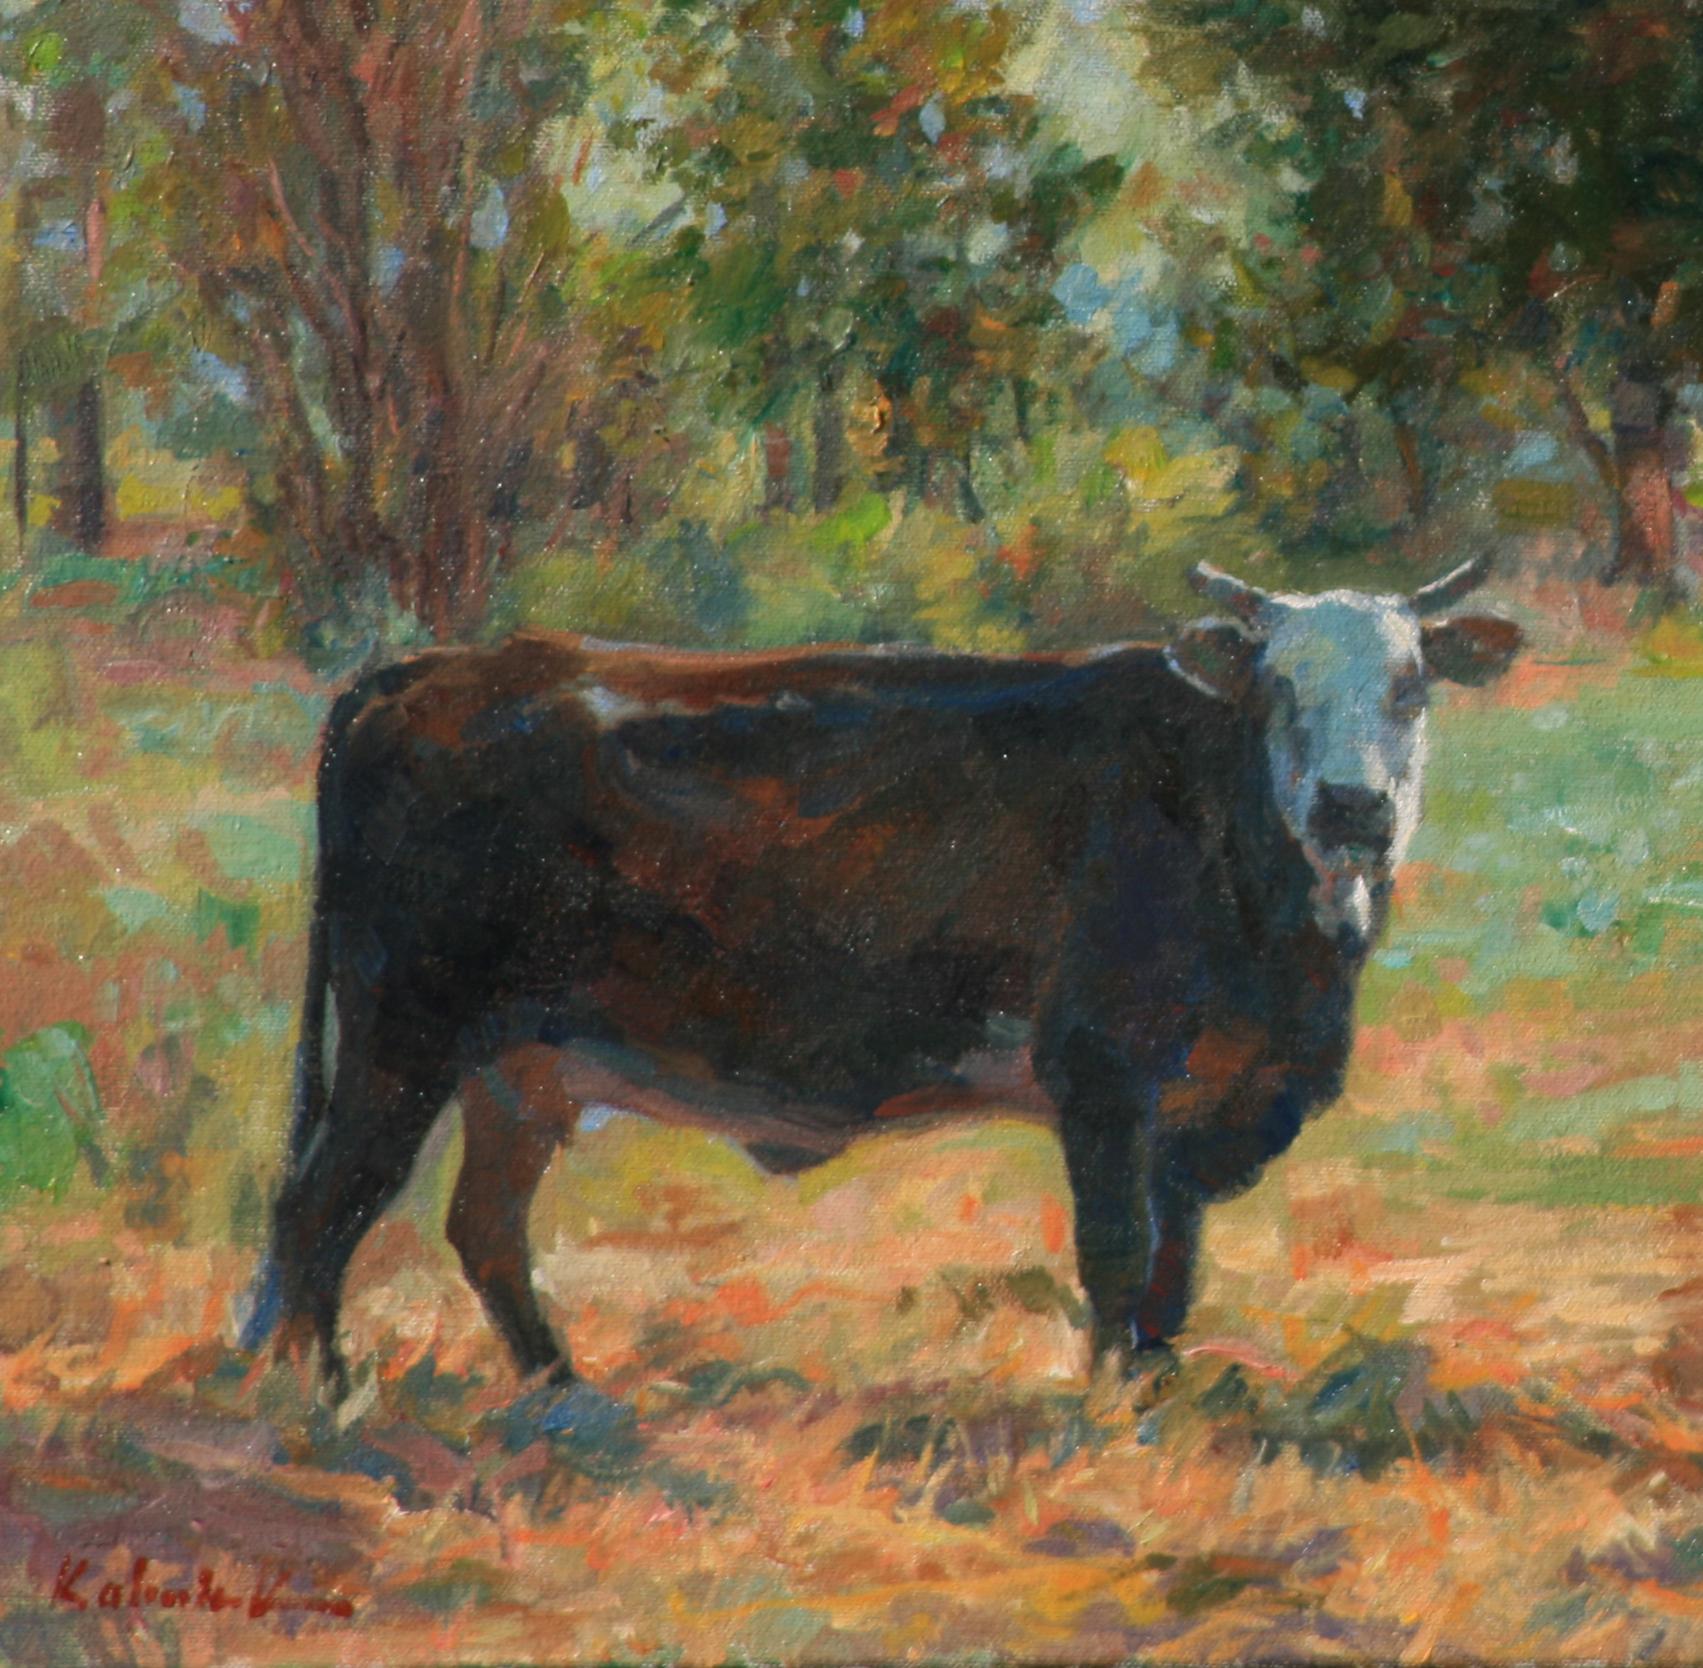 Morning Cows , Oil Painting , Western Art, oíl painting, Texas Artist, Landscape - Brown Animal Painting by William Kalwick